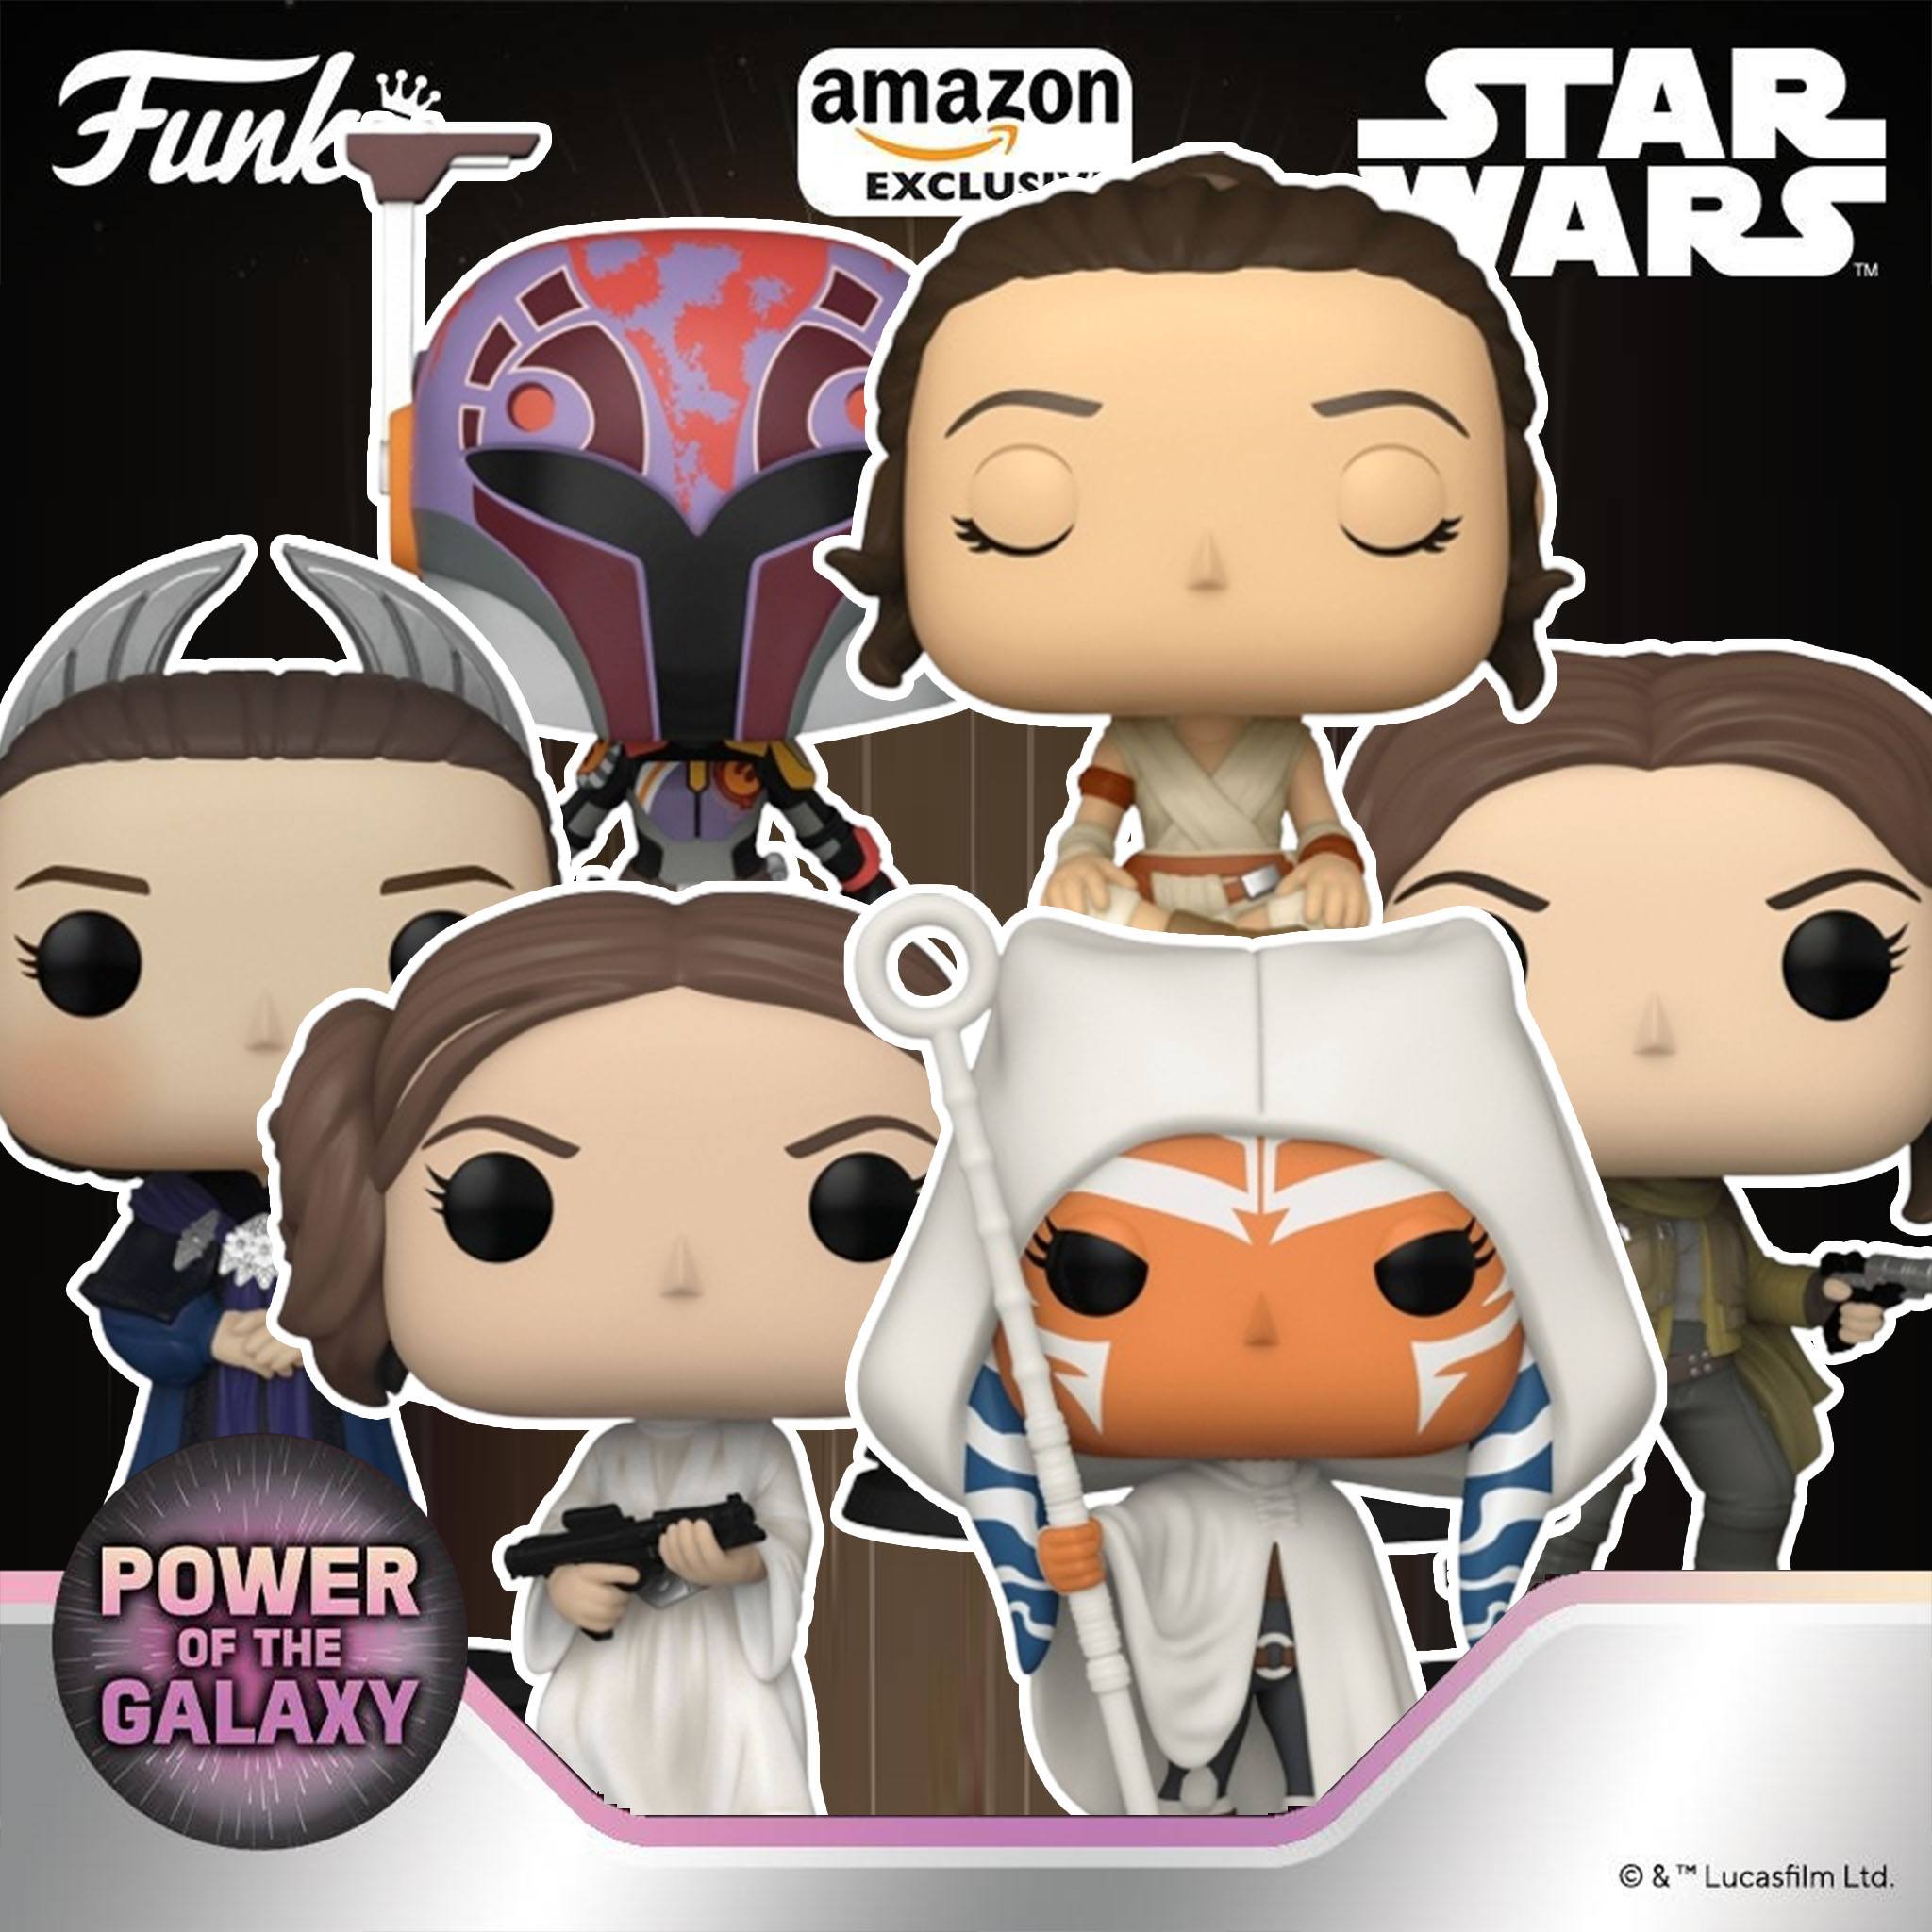 Funko POP Power of the Galaxy set features the powerful women of Star Wars